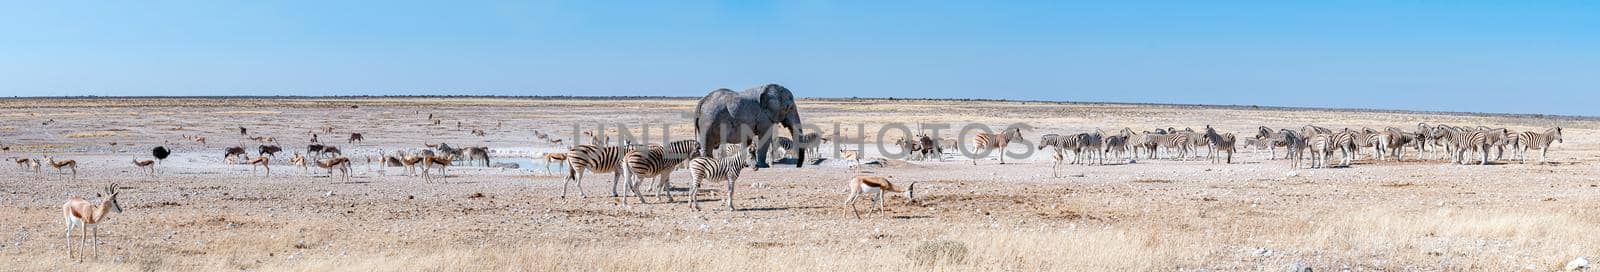 Panorama of an african elephant drinking water at the Nebrownii waterhole in northern Namibia. Burchells zebras, oryx, springbok and a male ostrich are visible